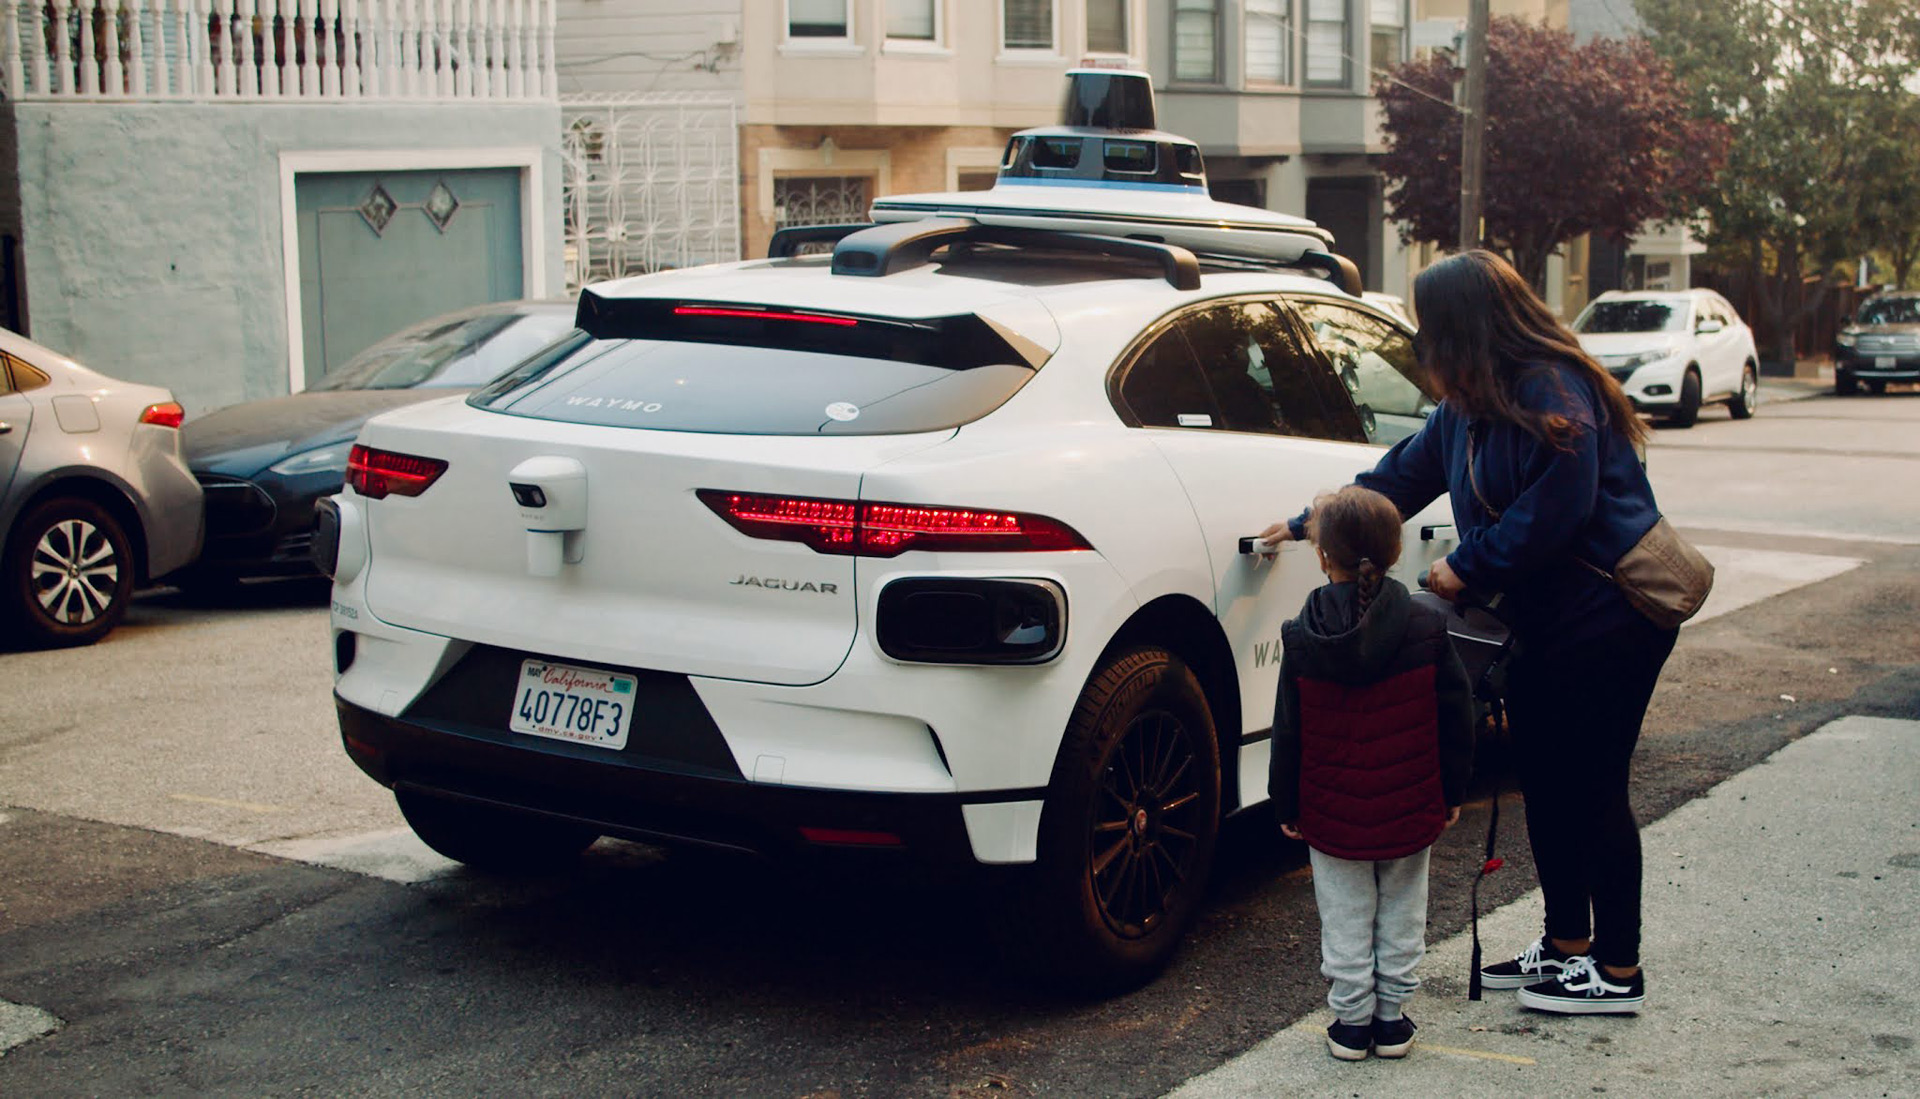 Waymo's self-driving Jaguar I-Pace electric cars are ready for passengersWaymo's self-driving Jaguar I-Pace electric cars are ready for passengers